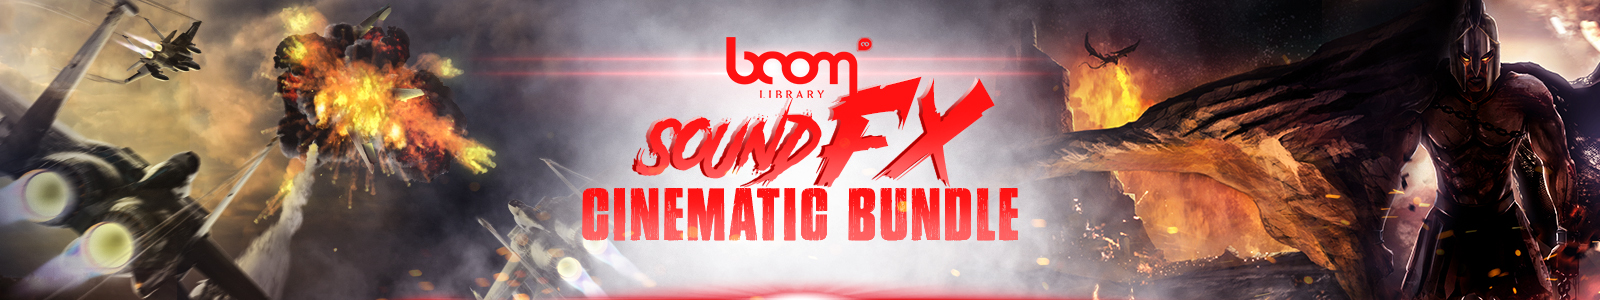 BOOM Library for $99 - 80% Off Sound FX Cinematic Bundle